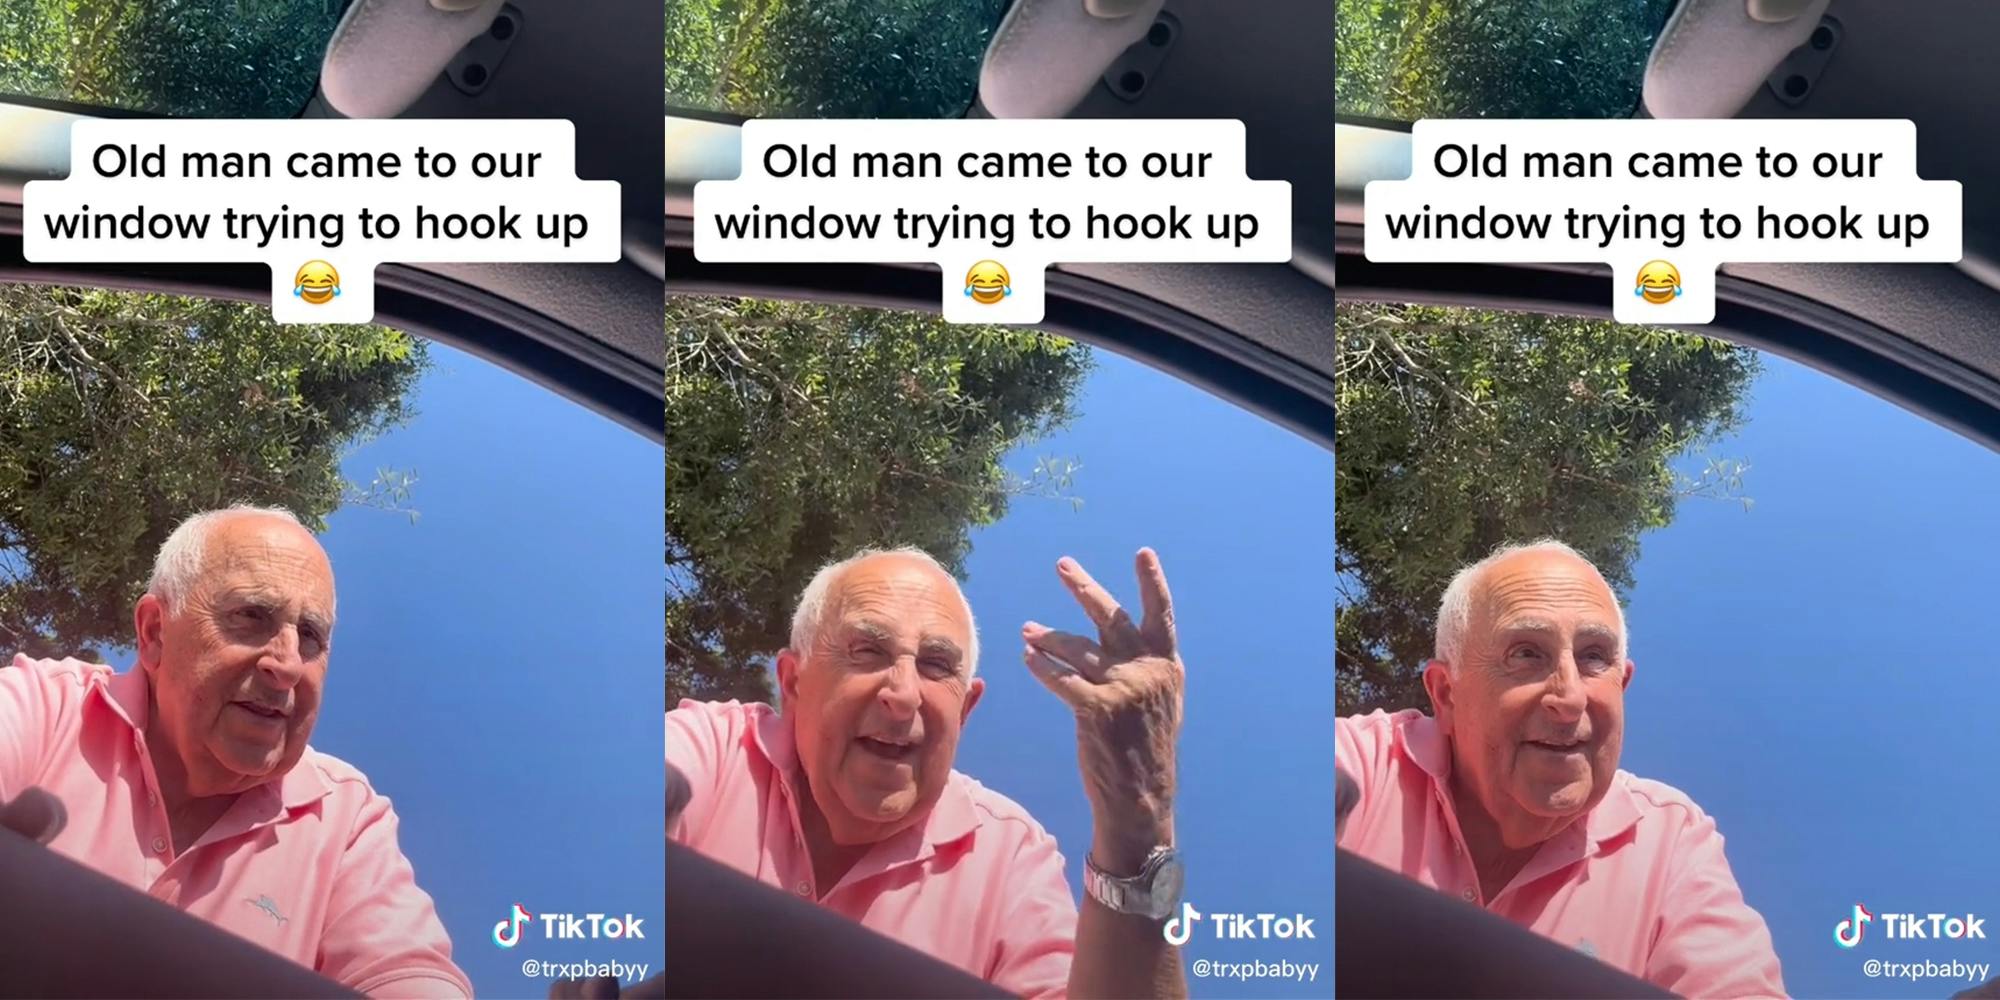 TikTokers Film 'Old Man' Trying to Hook Up With Them